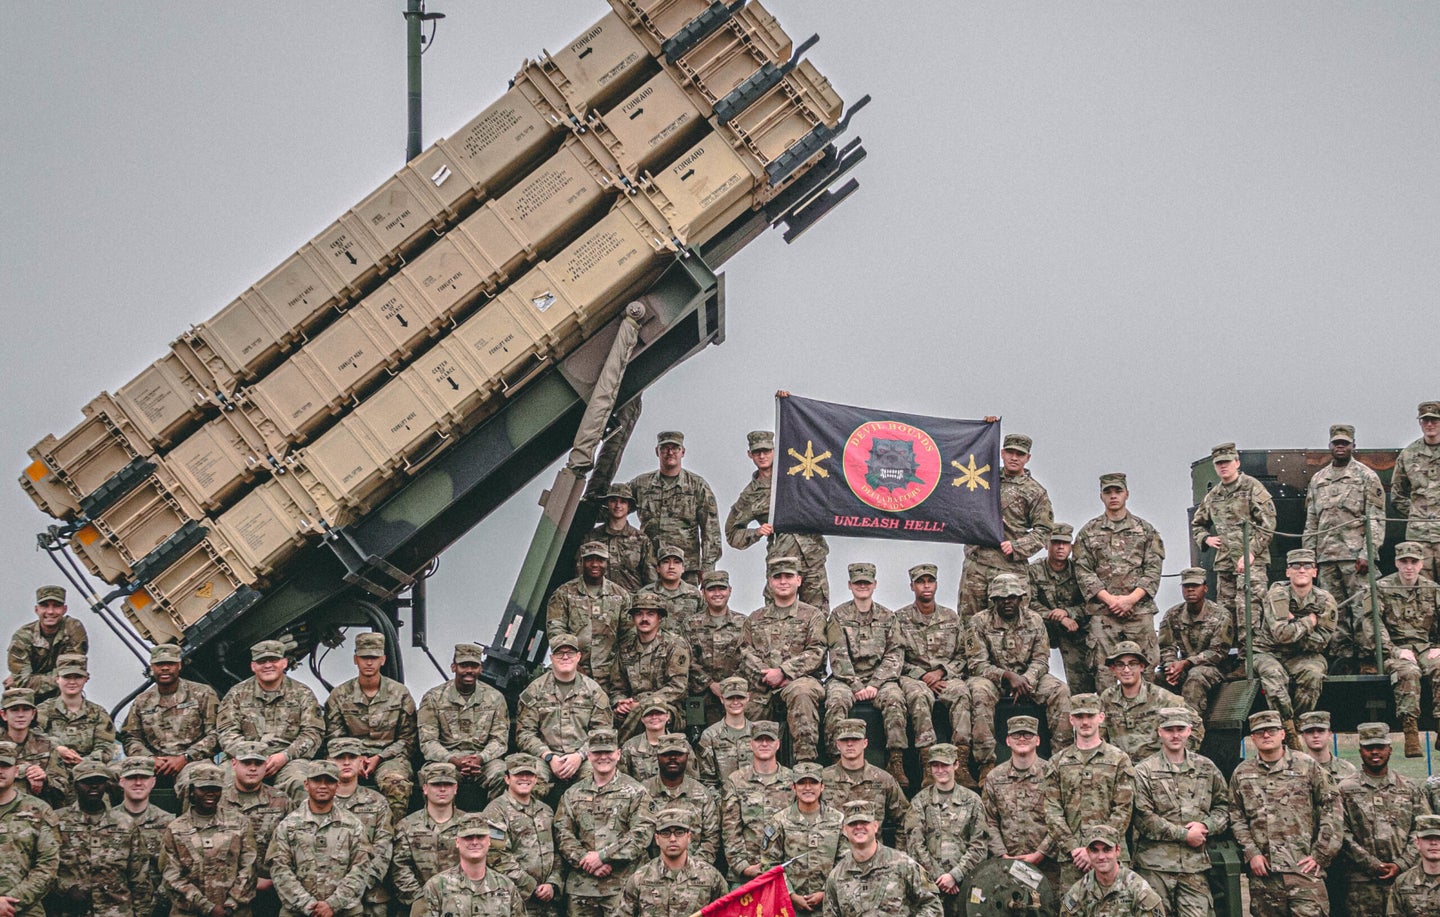 U.S. Army air defenders assigned to 5th Battalion, 7th Air Defense Artillery Delta Battery pose on a 10th Army Air Missile Defense Command Patriot launching station. The Army is adding positions for 7,500 soldiers in air and missile defense while also cutting thousands of unfilled positions for its plan to restructure the entire force.  Army photo by Sgt. 1st Class Christopher Smith)